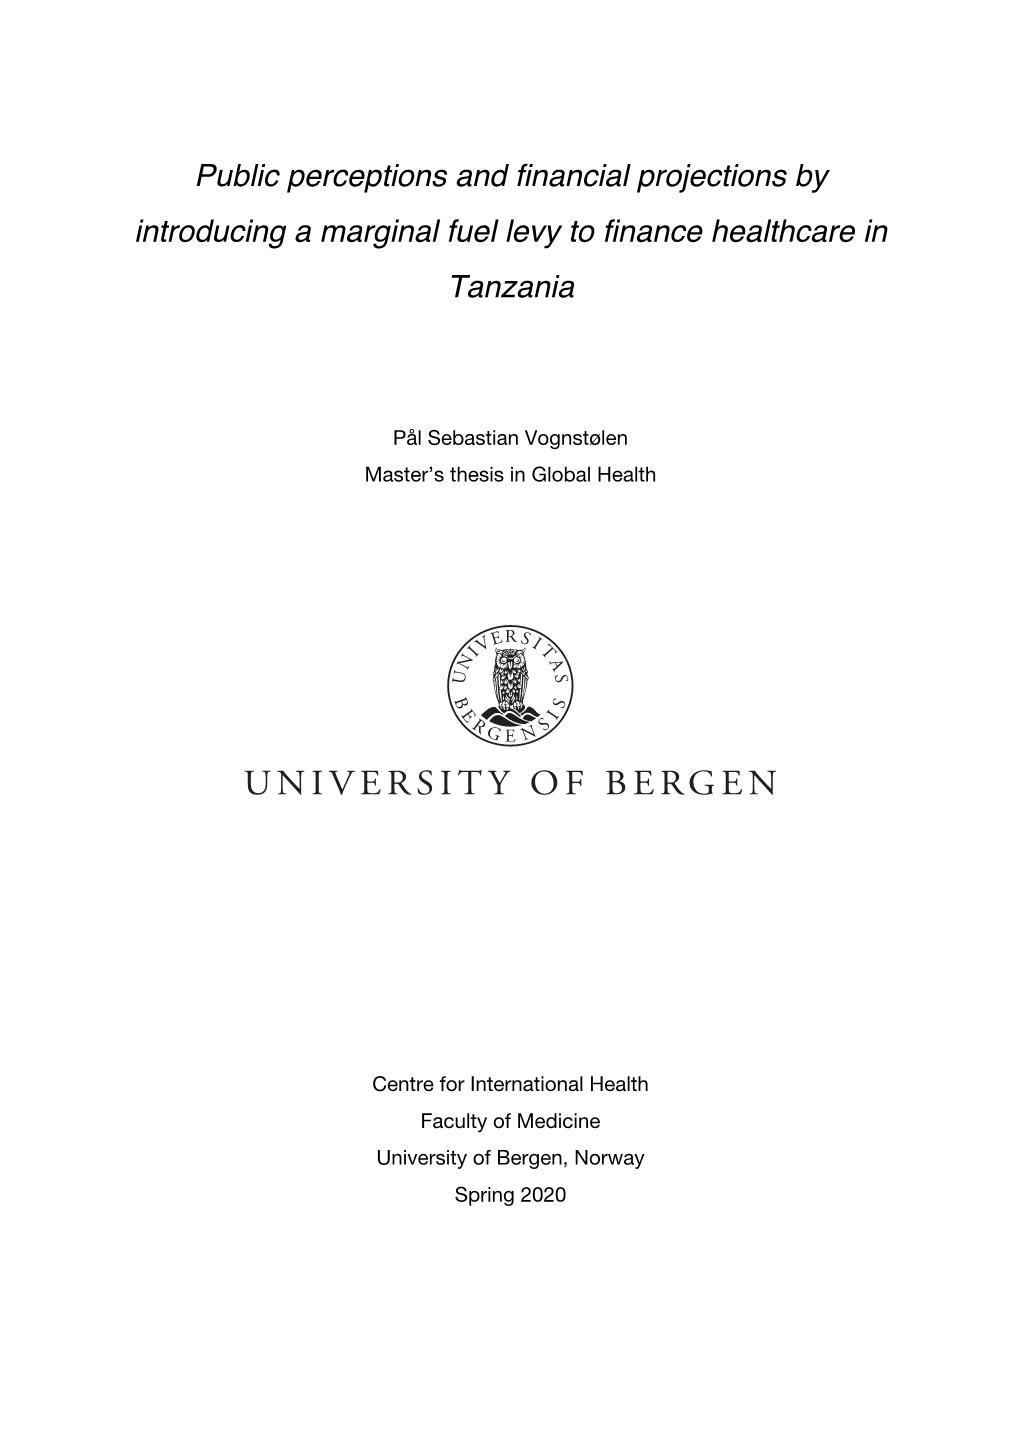 Public Perceptions and Financial Projections by Introducing a Marginal Fuel Levy to Finance Healthcare in Tanzania